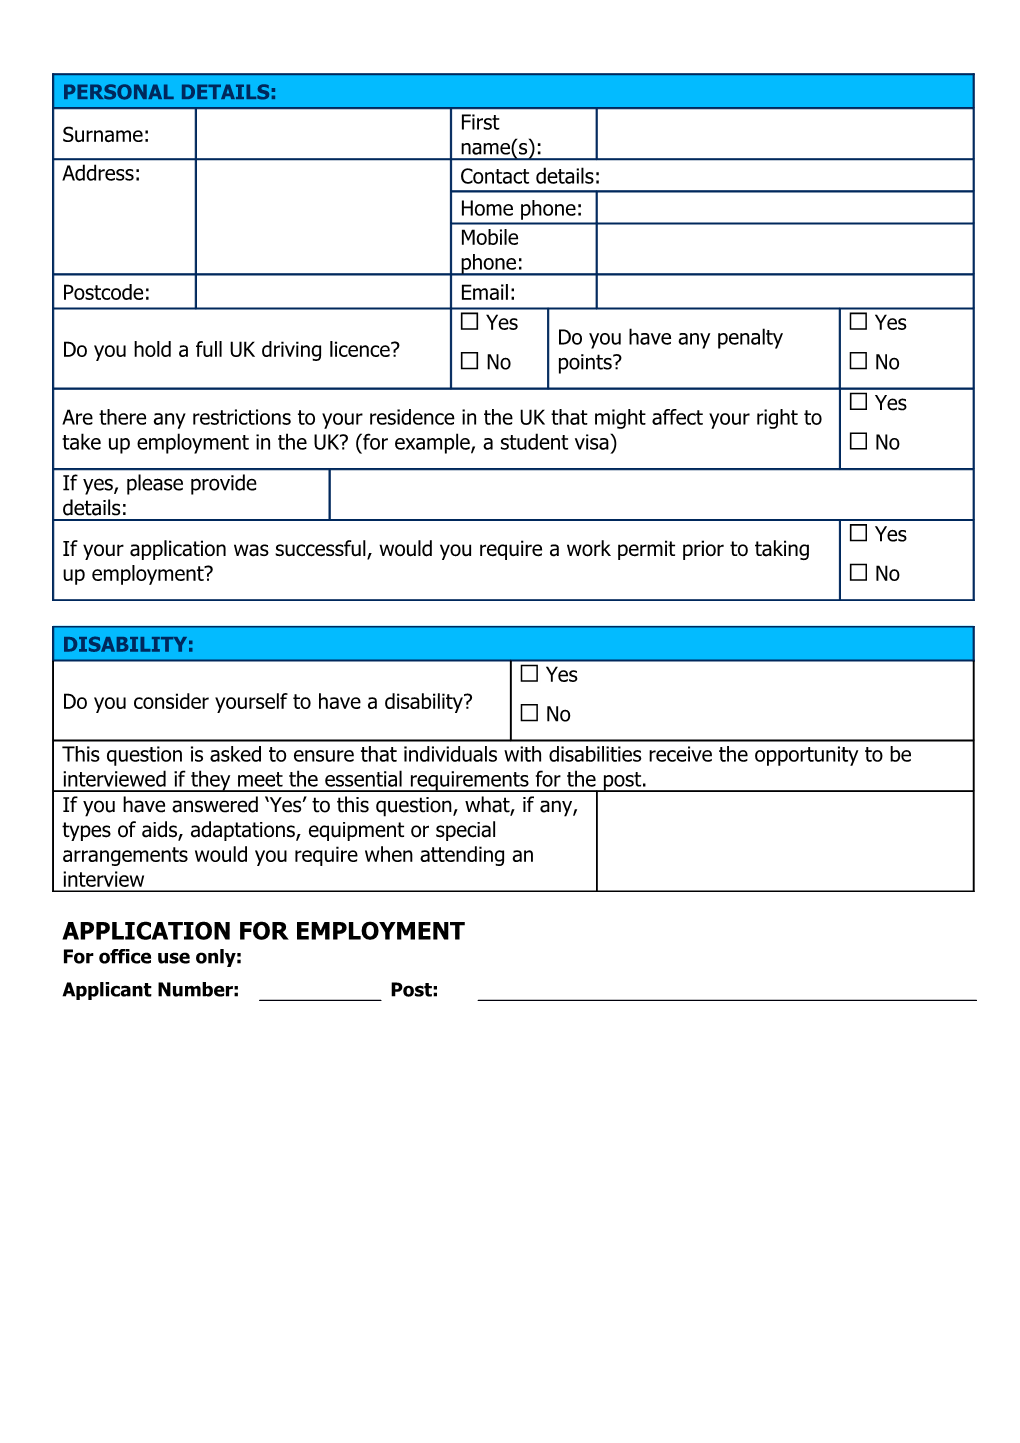 Application Form for the Post Of s4